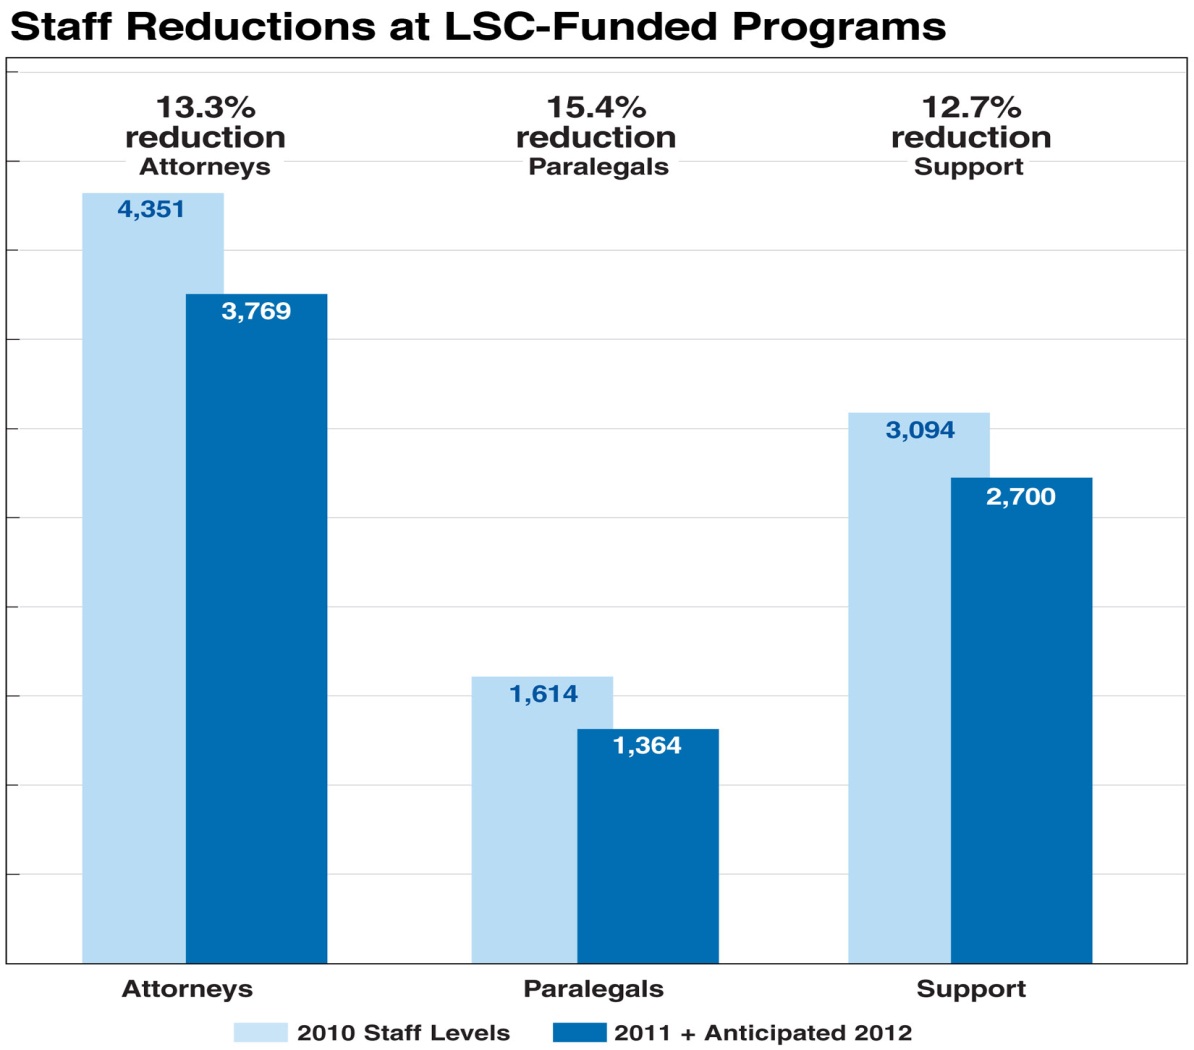 Bar graph showing staff reductions at LSC-funded programs